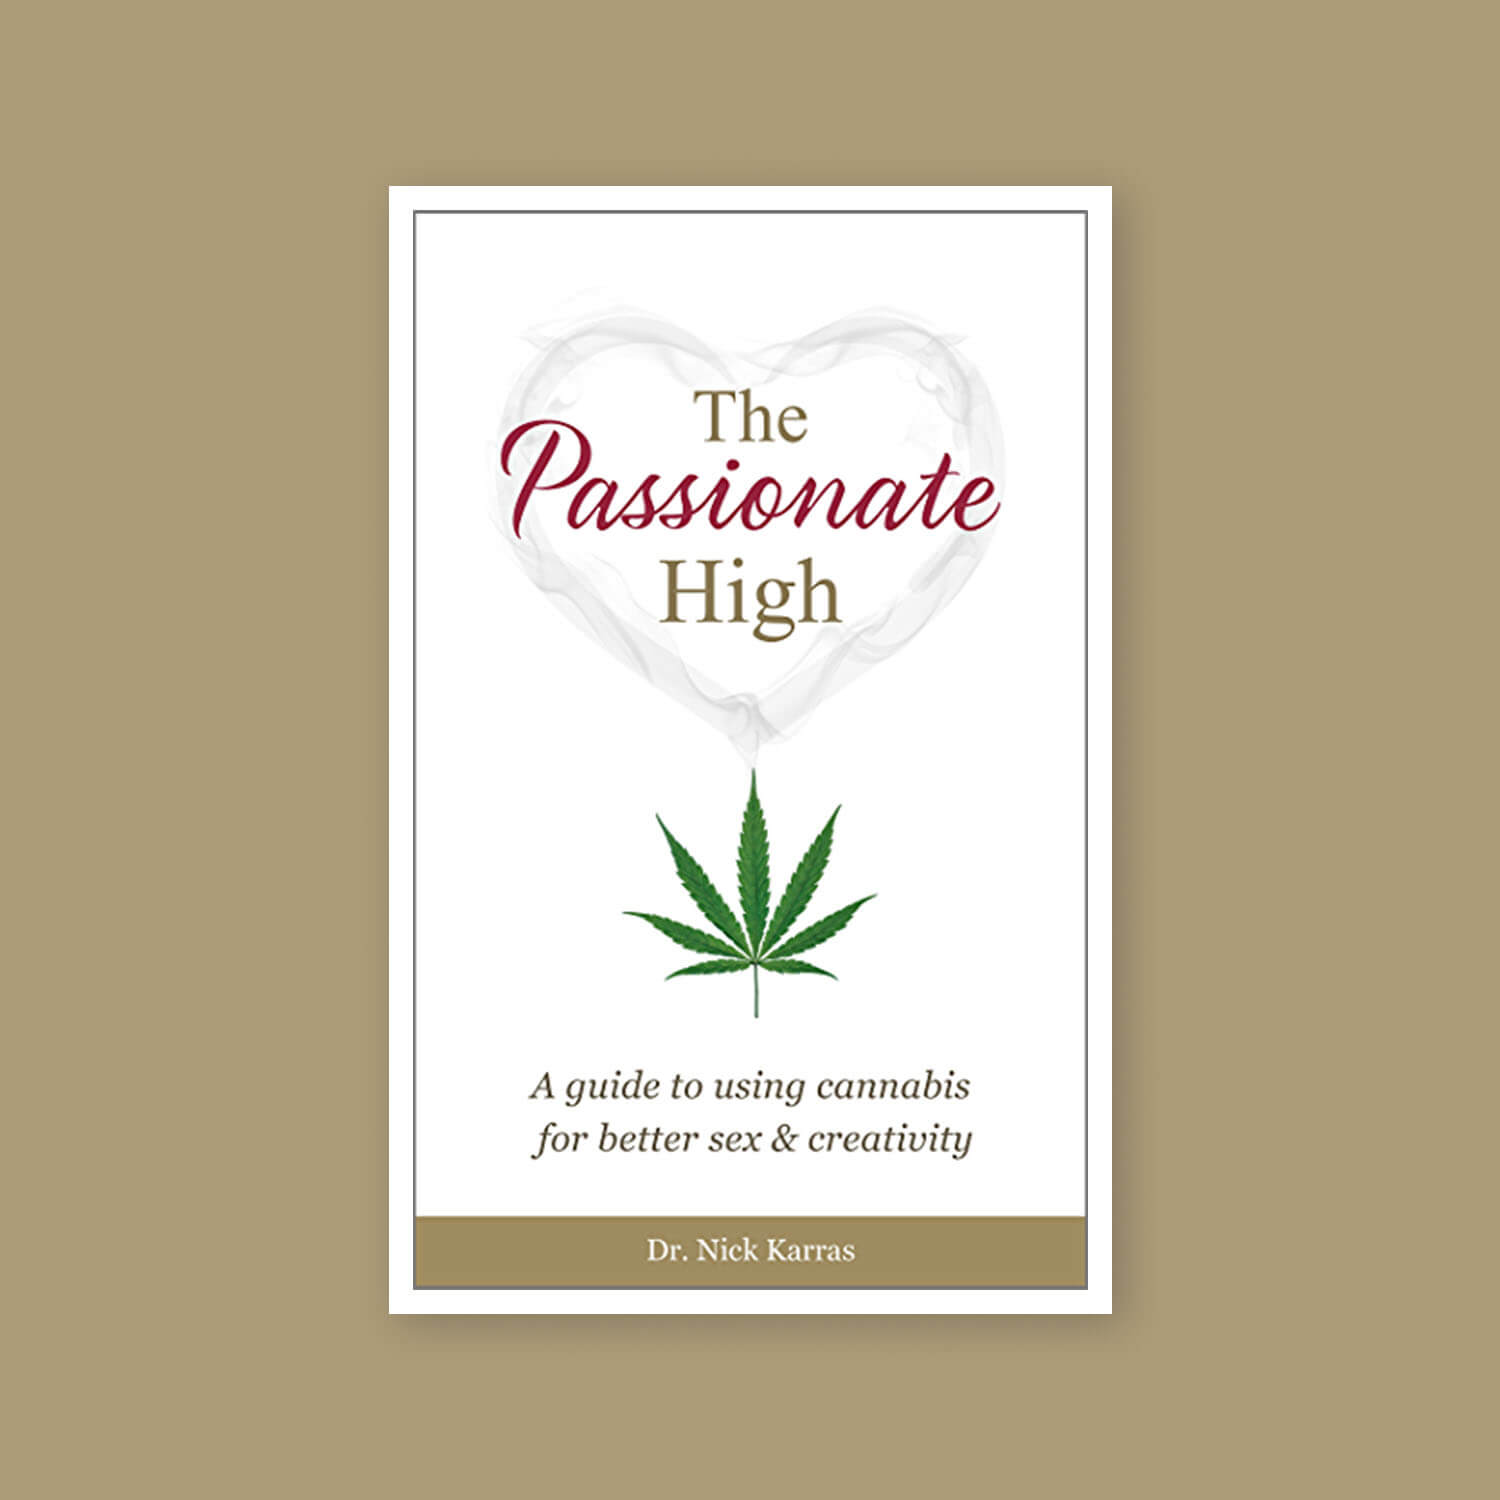 The Passionate High